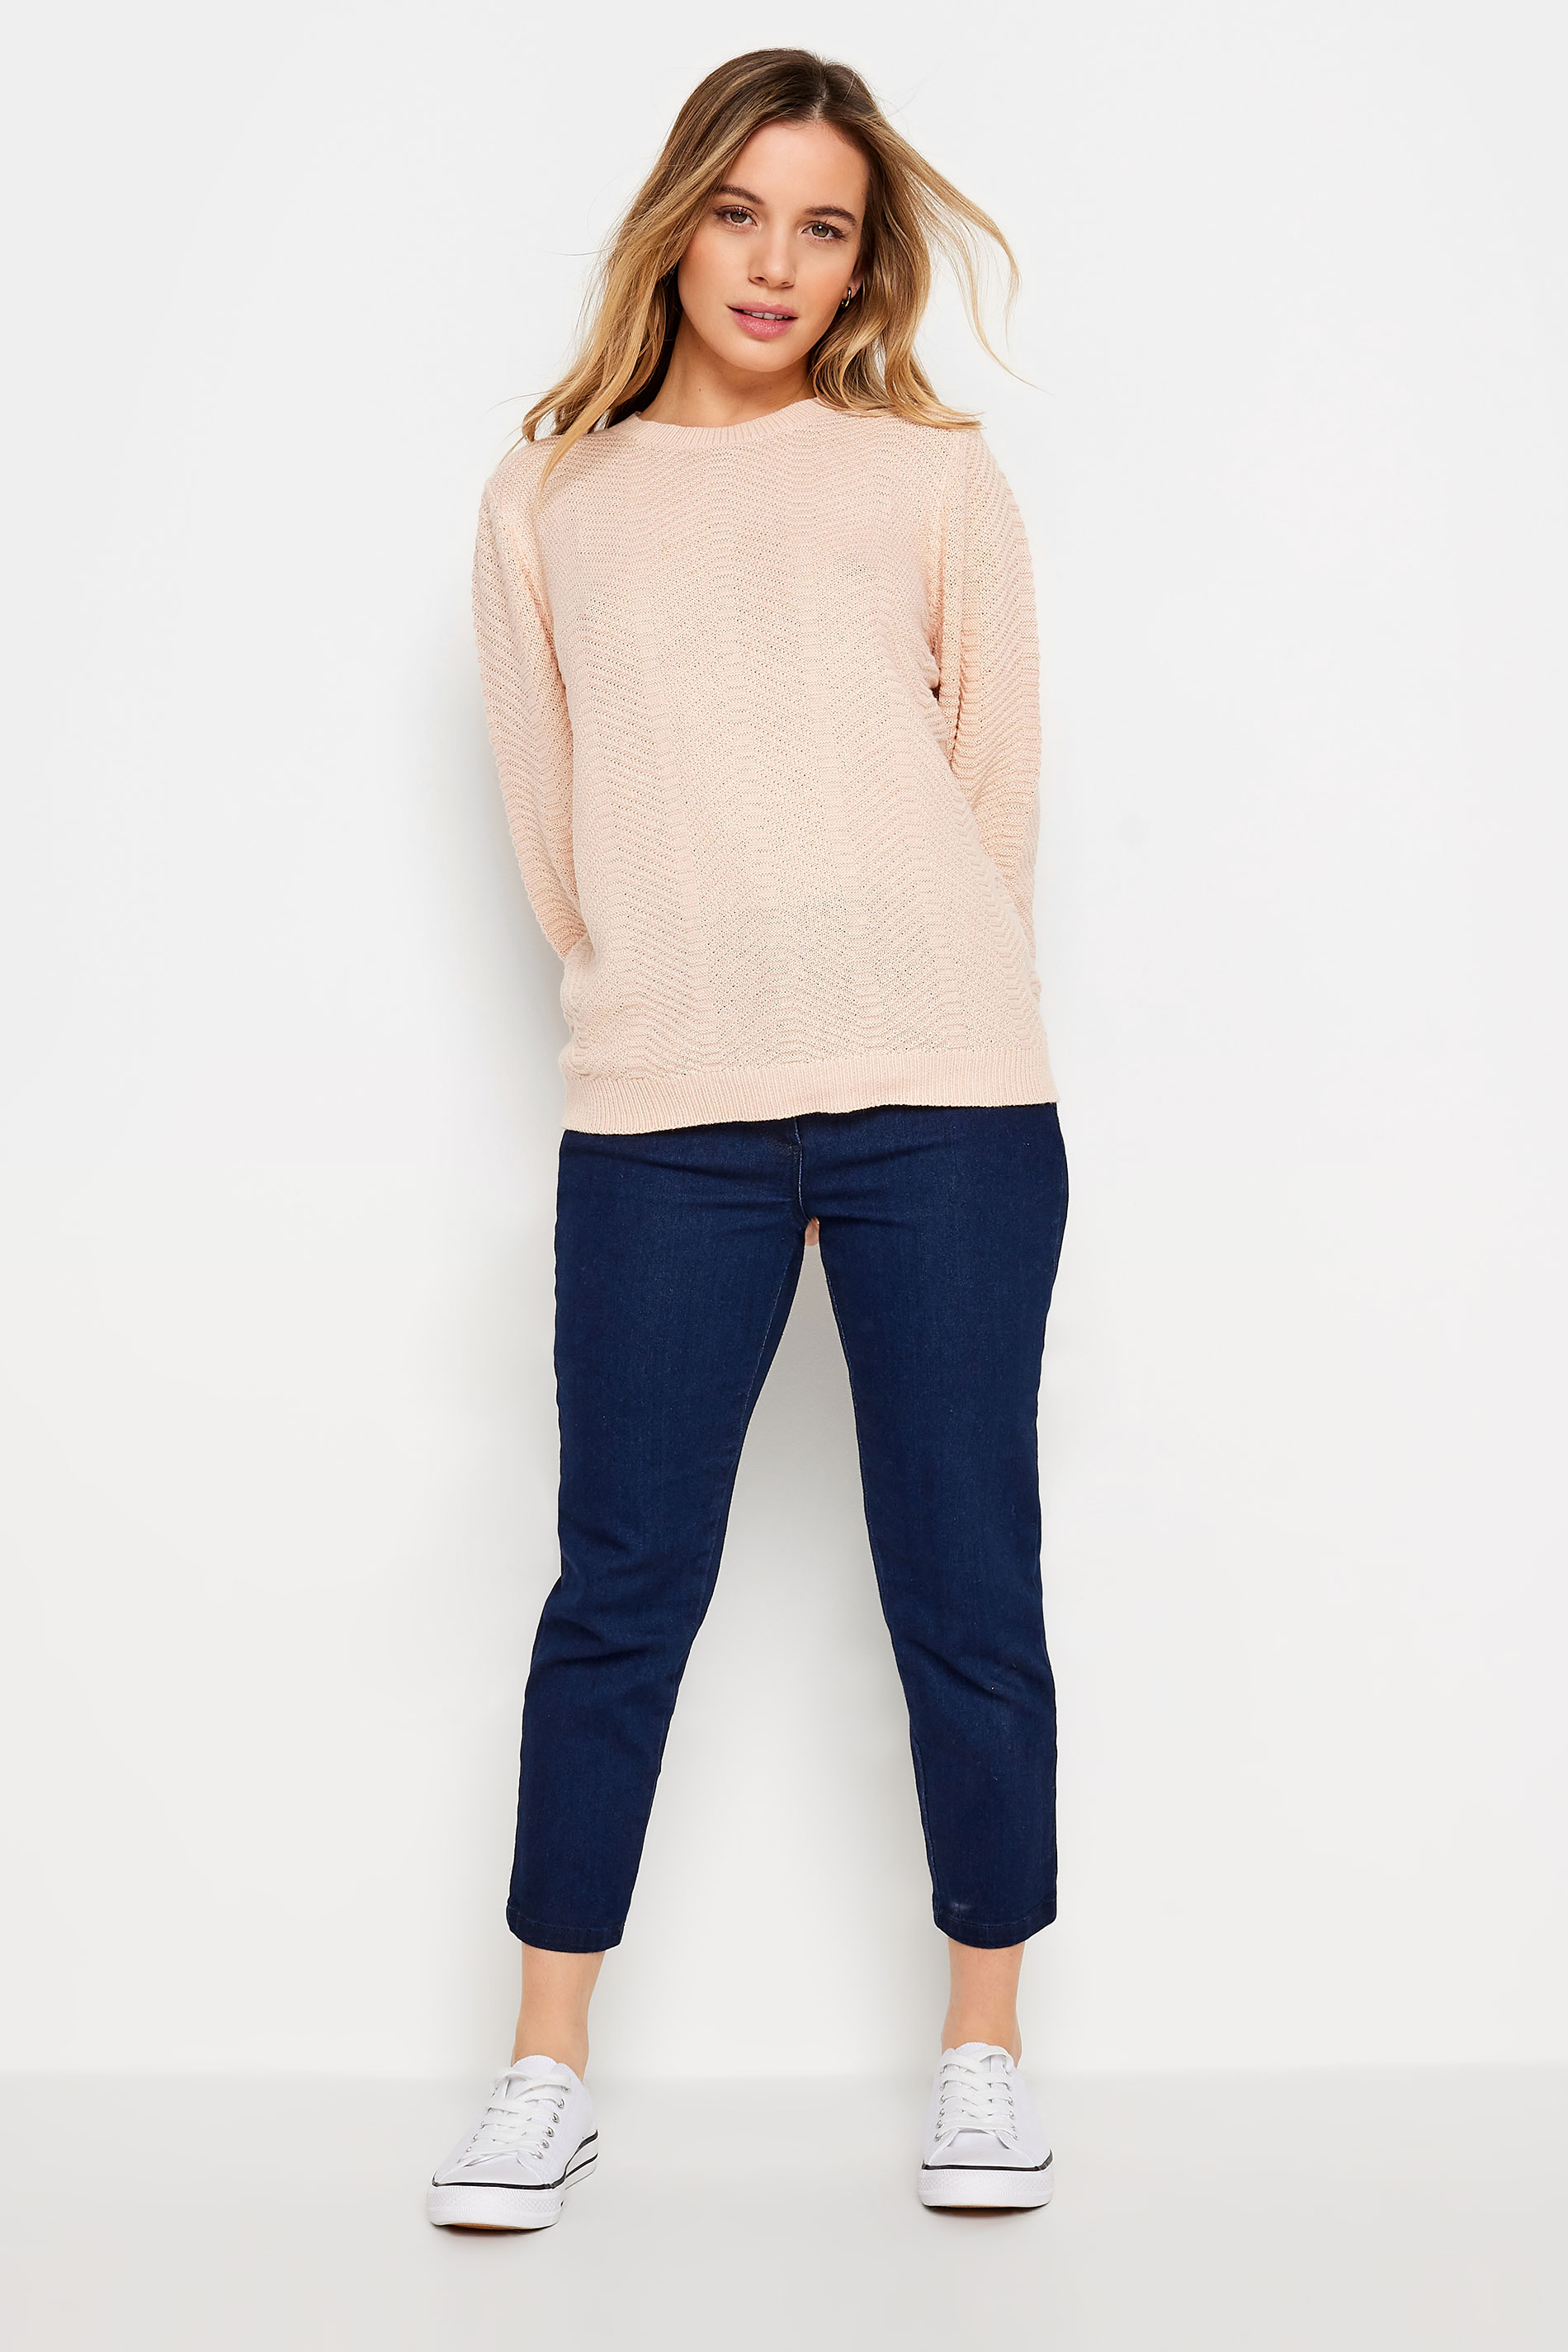 M&Co Petite Pink Ribbed Knit Jumper | M&Co 2